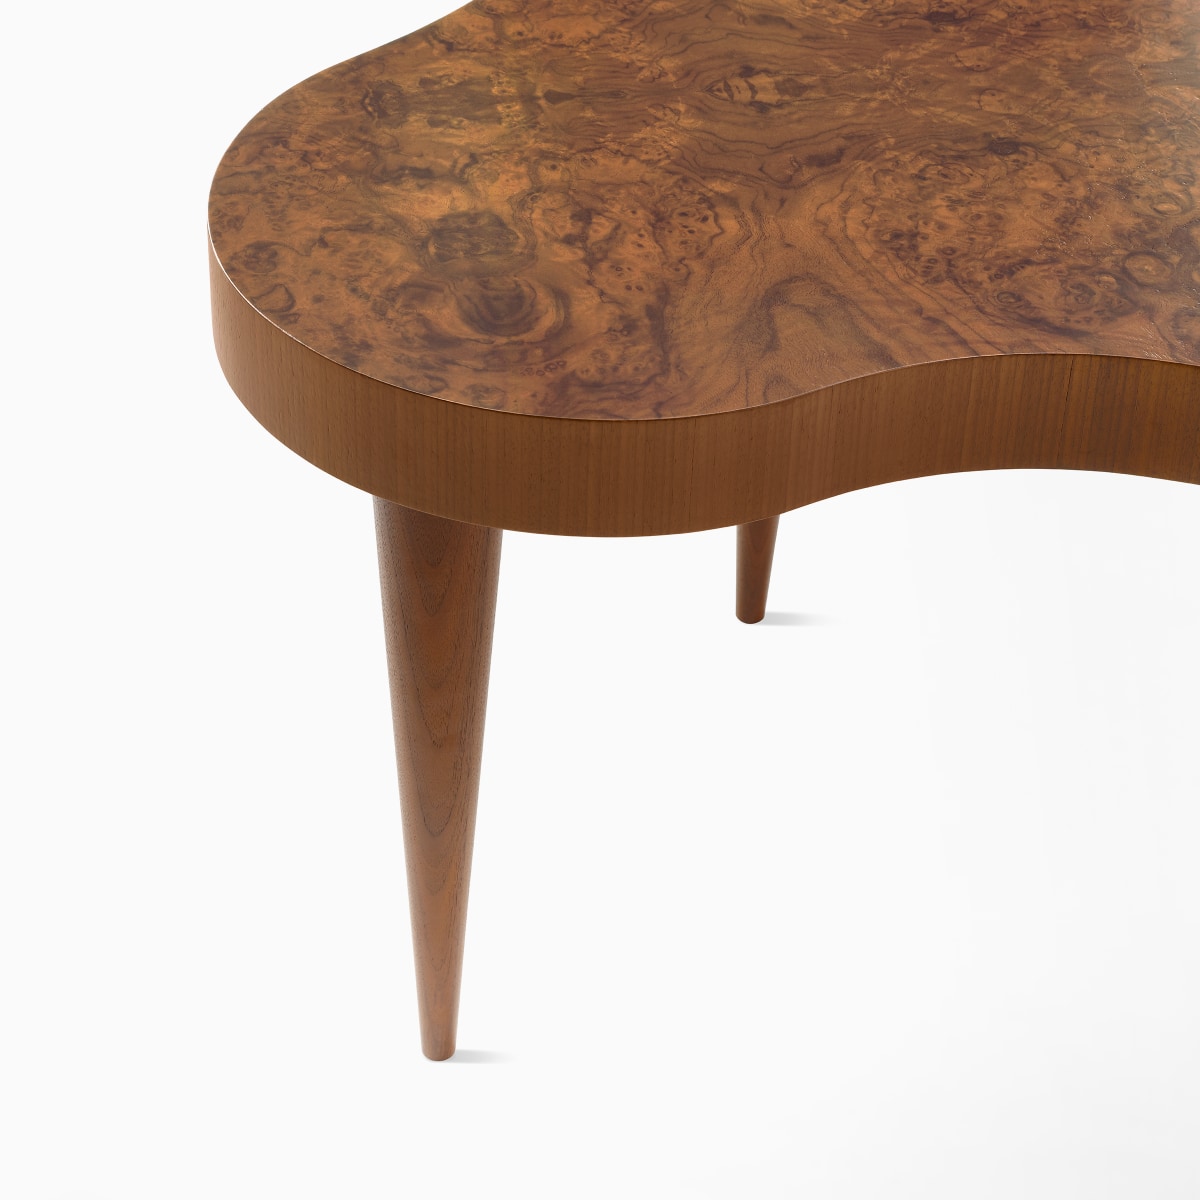 Close-up view of the tapered leg on a Rohde side table in walnut burl.